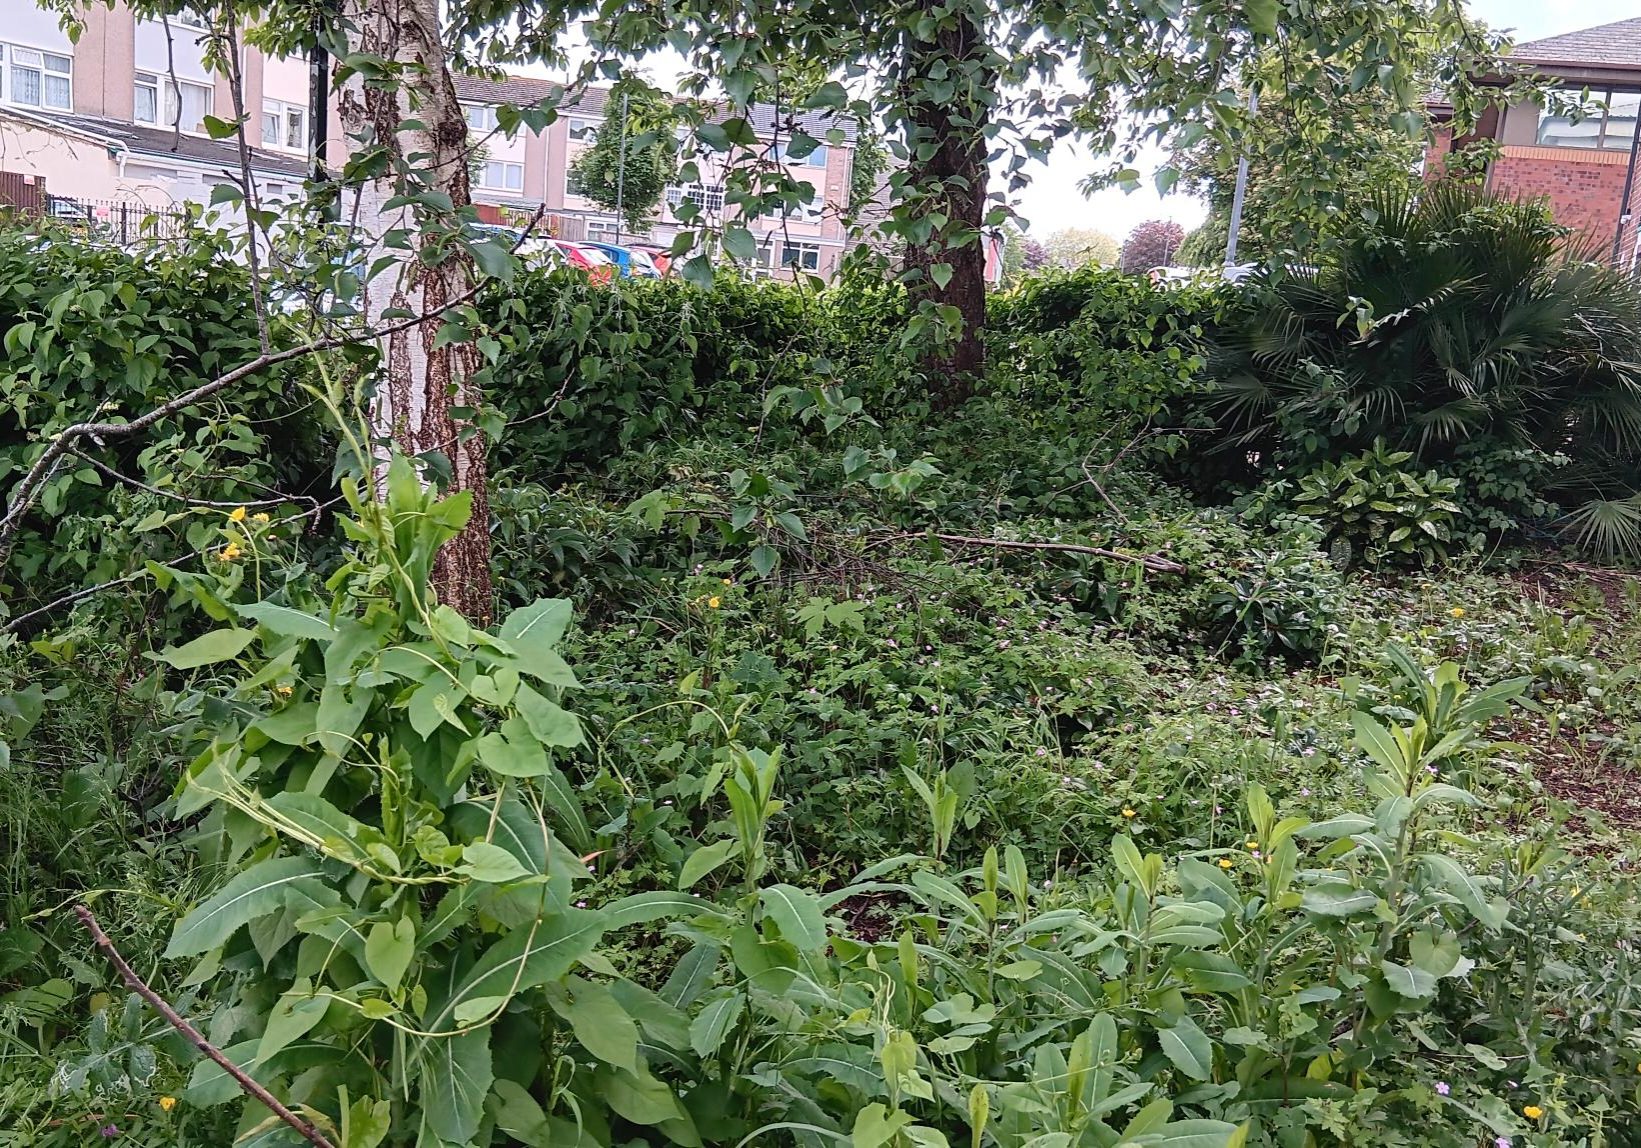 A green space filled with brambles, weeds and trees.